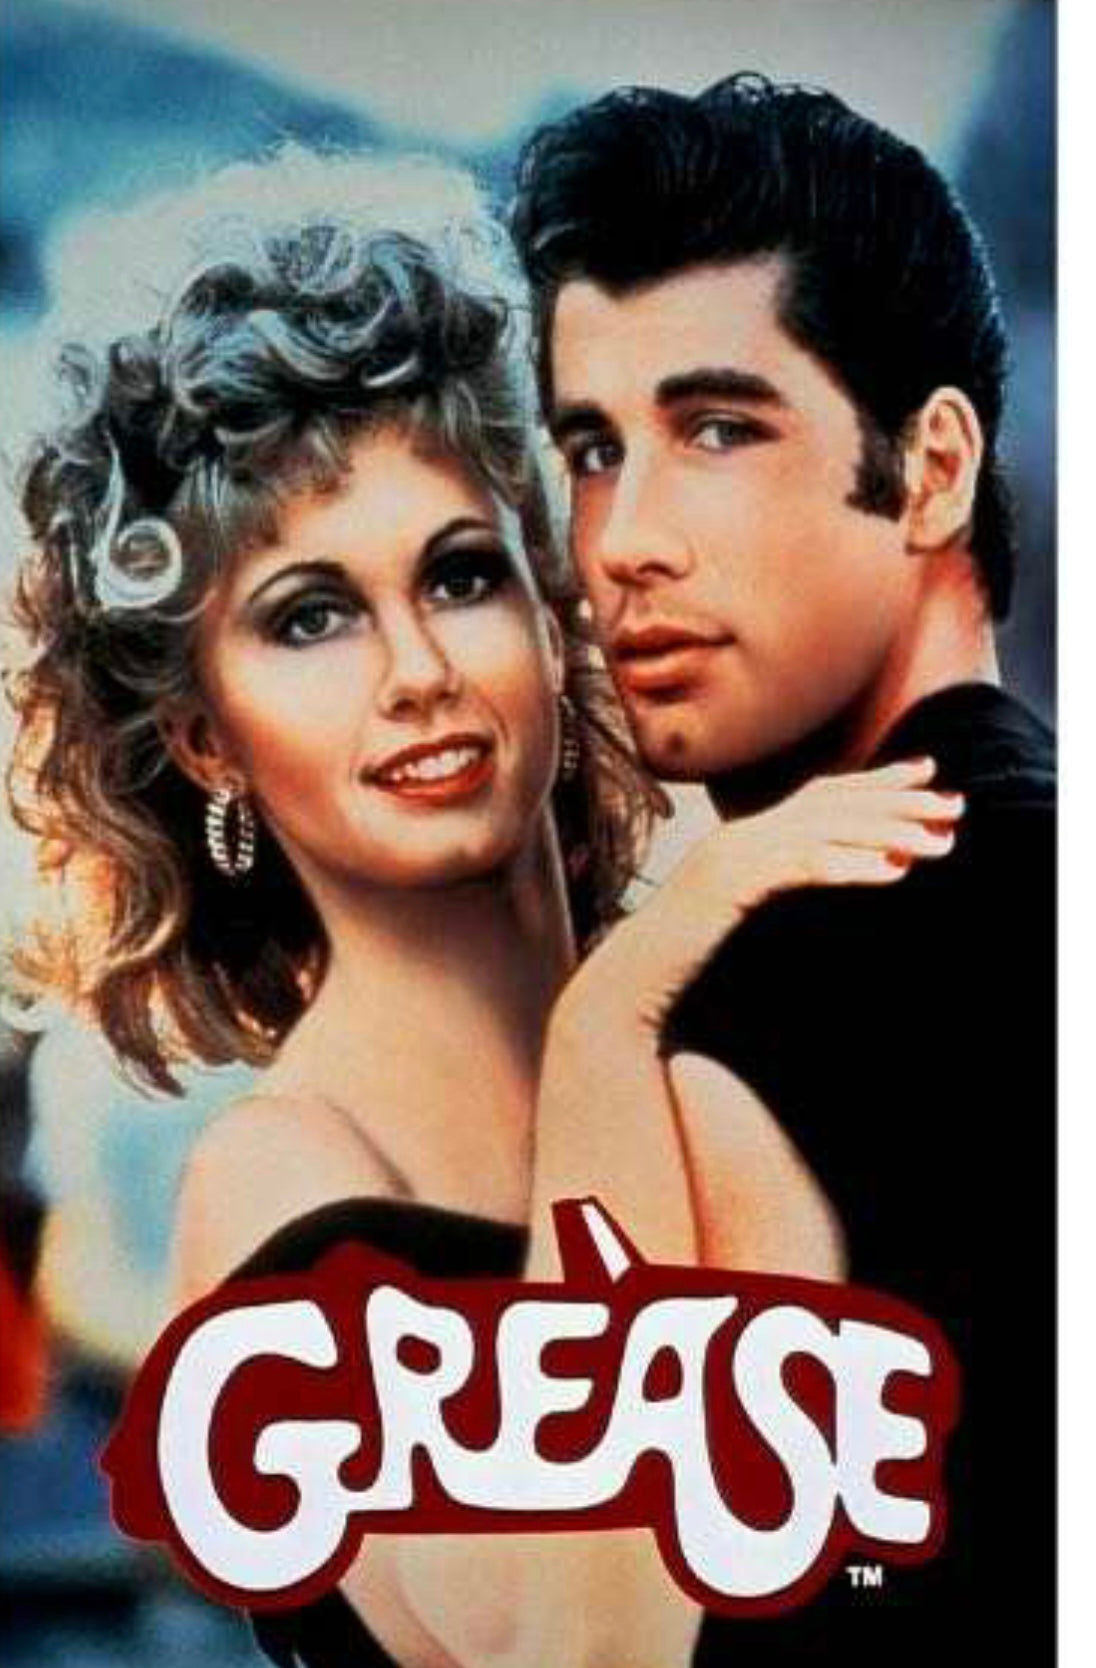 Grease movie poster 120x160cm